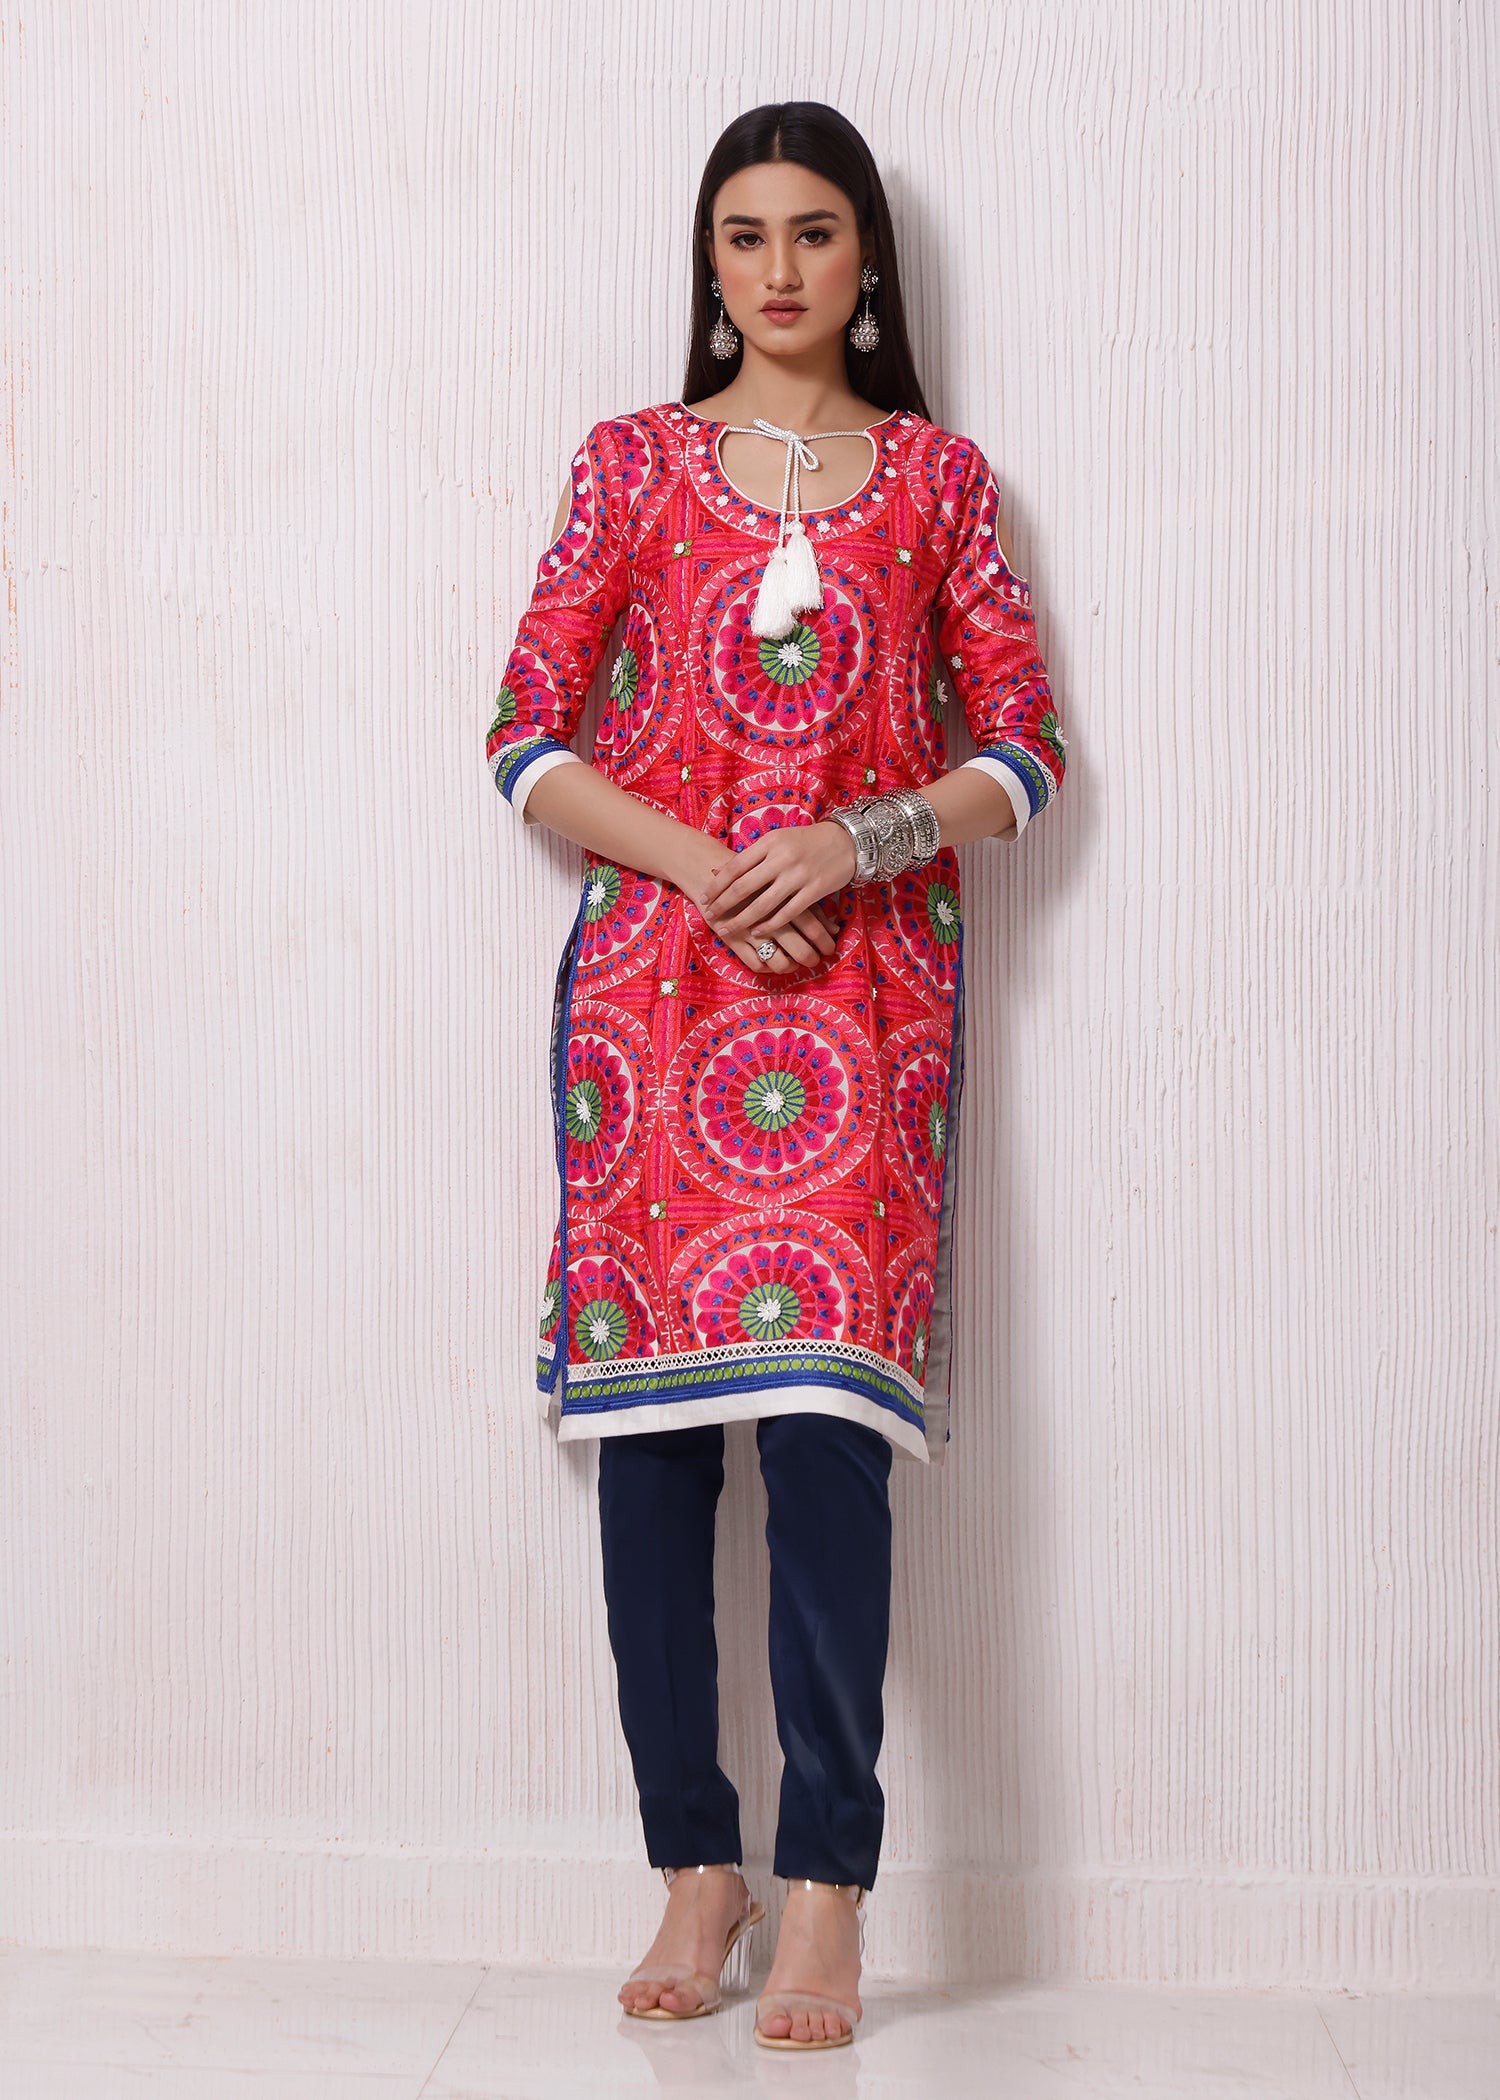 Latest collection By Rizwan Beyg. Evening wear | Printed design